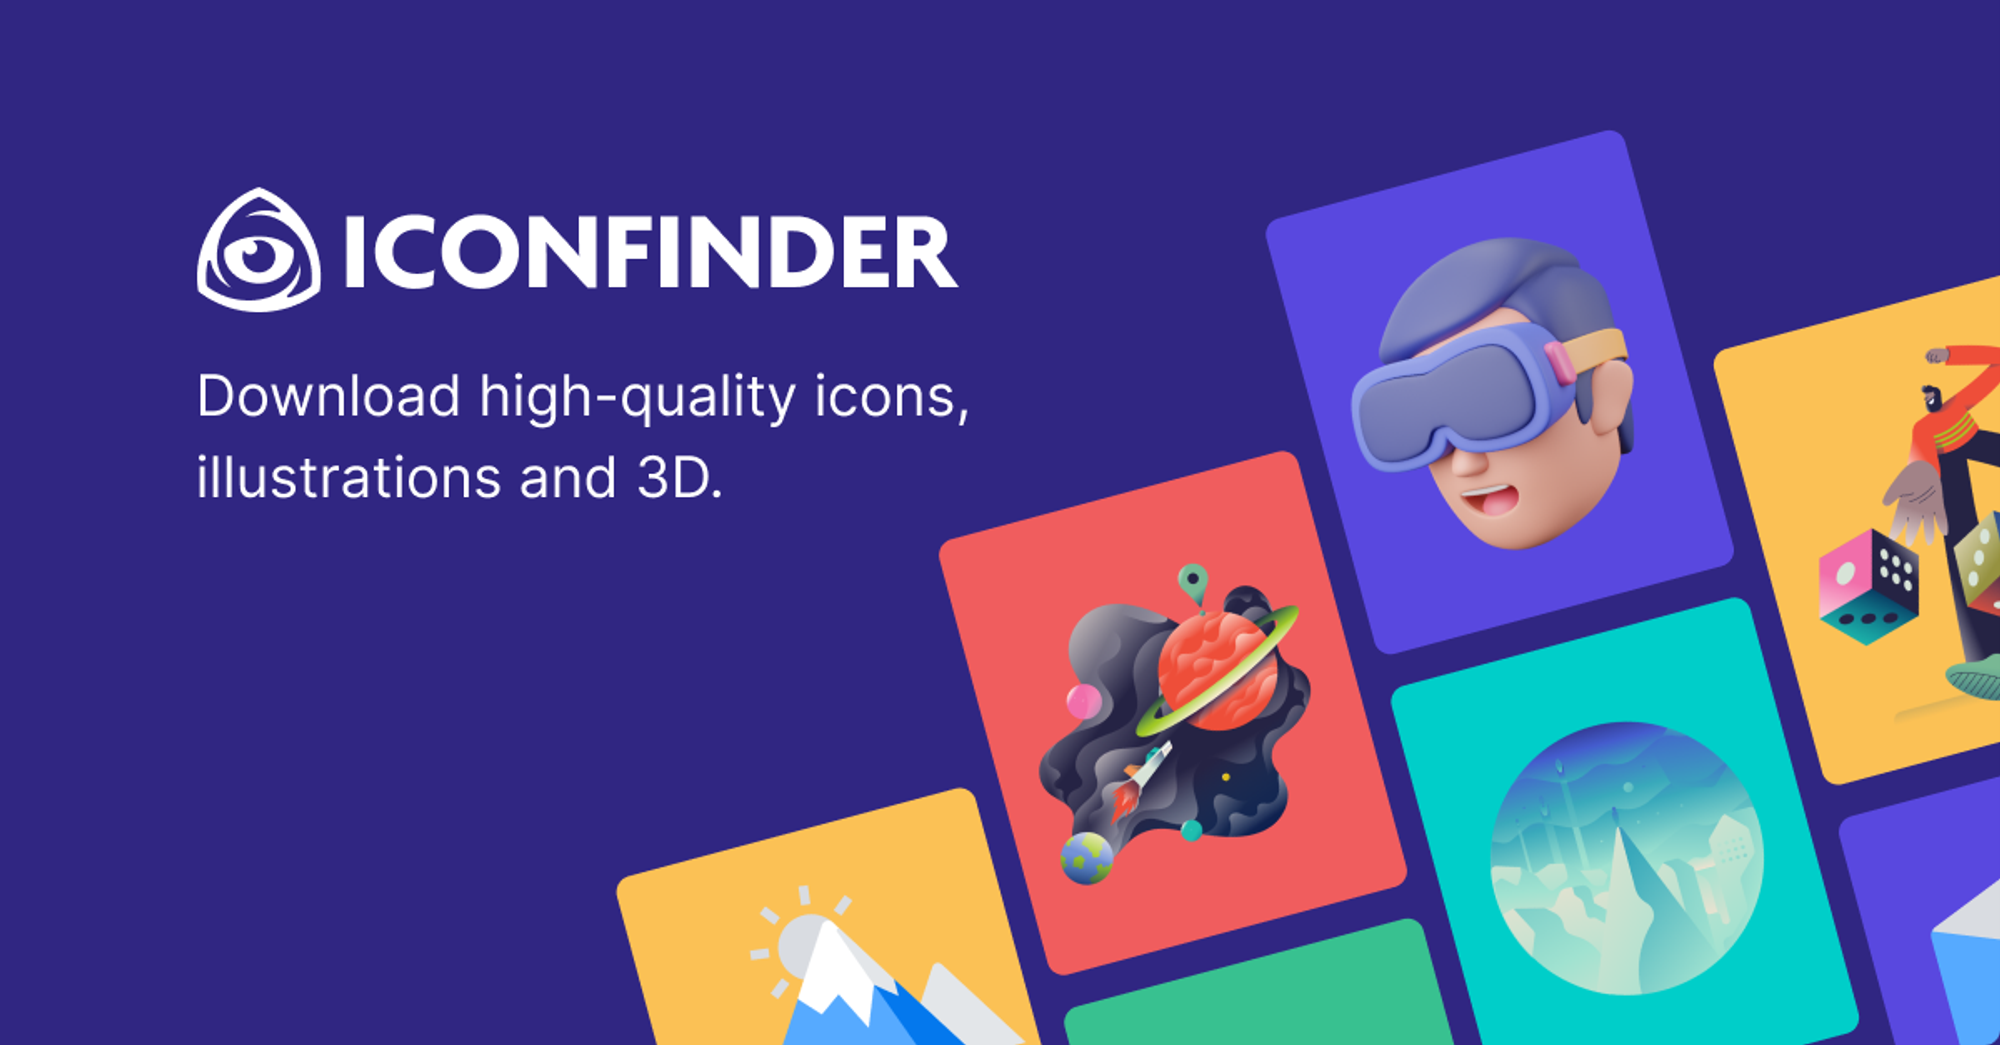 5,950,000+ free and premium vector icons - Iconfinder